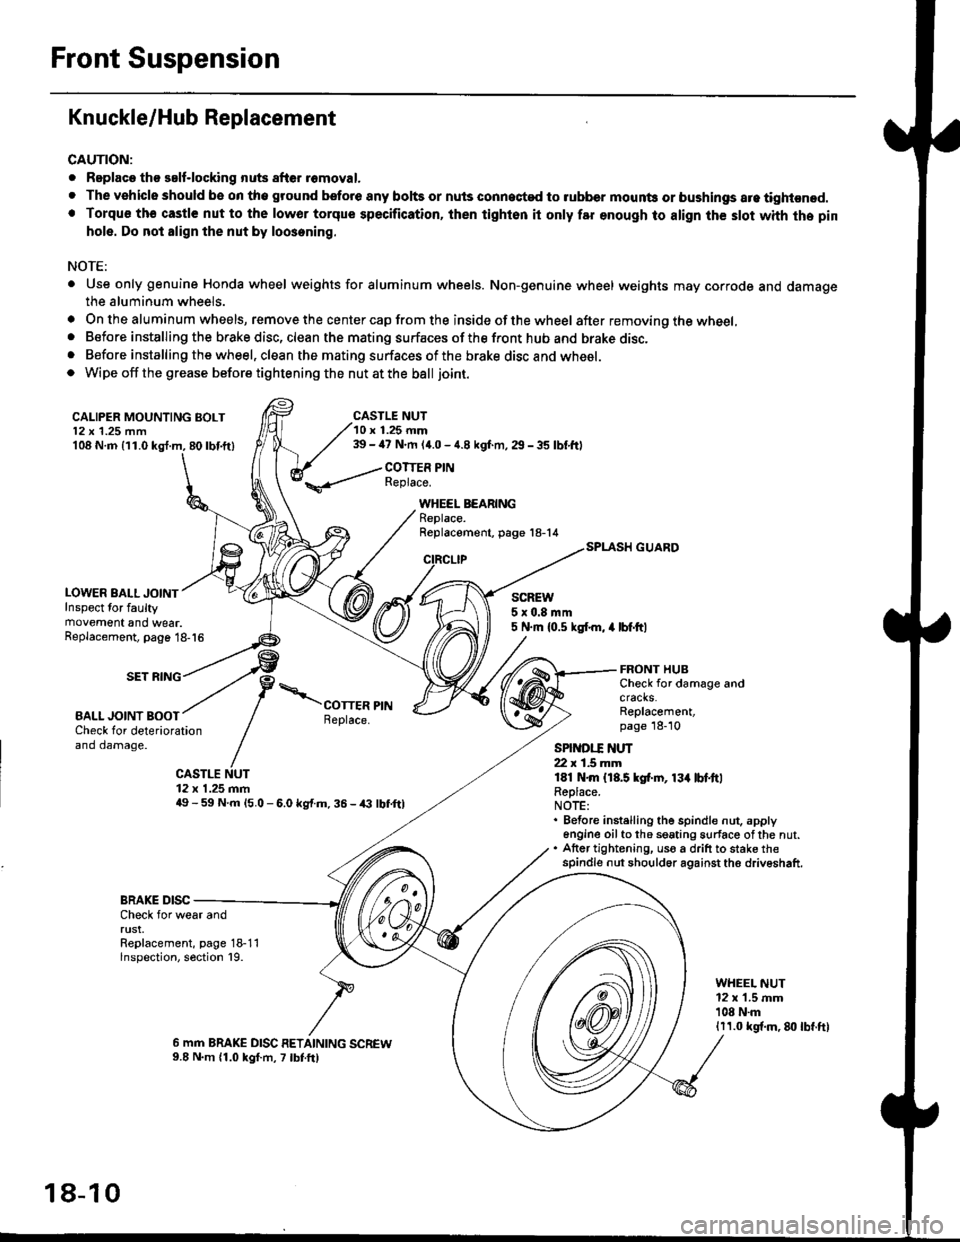 HONDA CIVIC 1996 6.G User Guide Front Suspension
Knuckle/Hub Replacement
CAUTION:
. Replaco tho salf-locking nuts after romoval.
. The vehiclo should be on tho ground bsfore any bohs or nuls connected to rubber mounb or bushings are